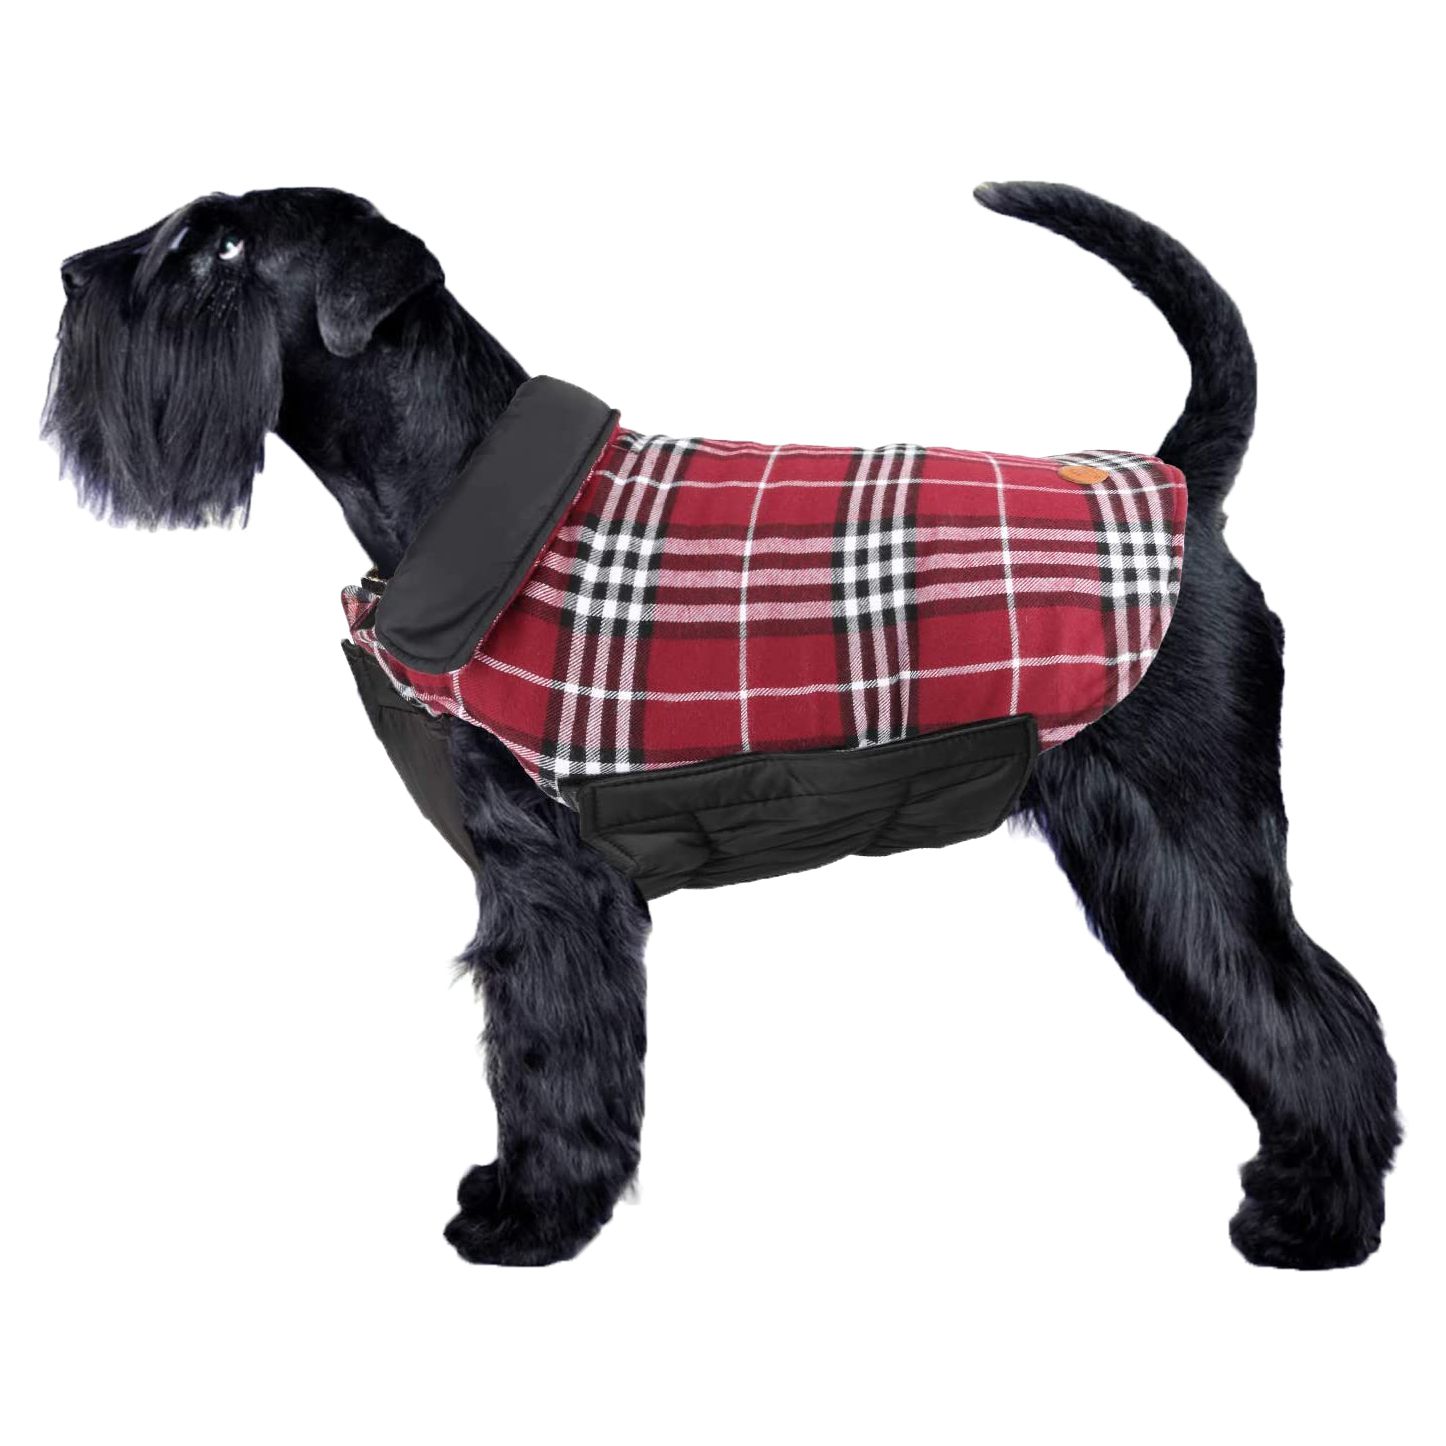 WEONE Dog Coat Plaid Fleece Warm Christmas Clothes,Reflective Reversible Cold Weather Jacket for Medium Dogs Red,M